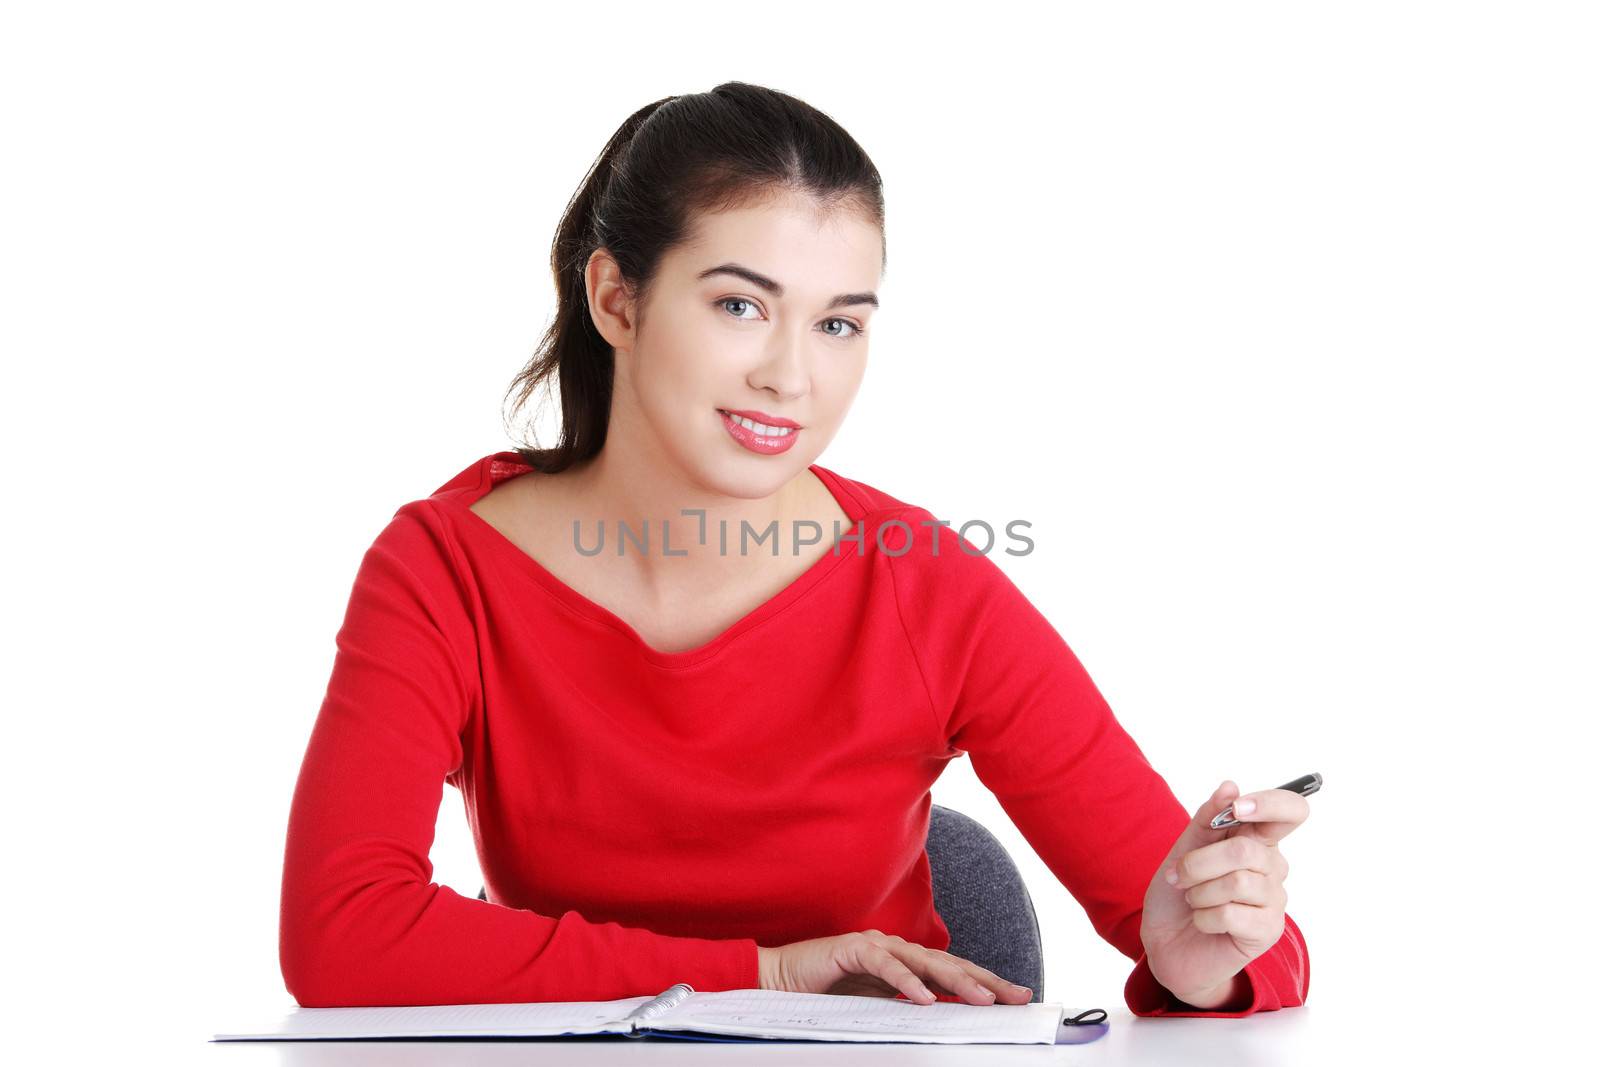 Adult student woman learnig at the desk, isolated on white background